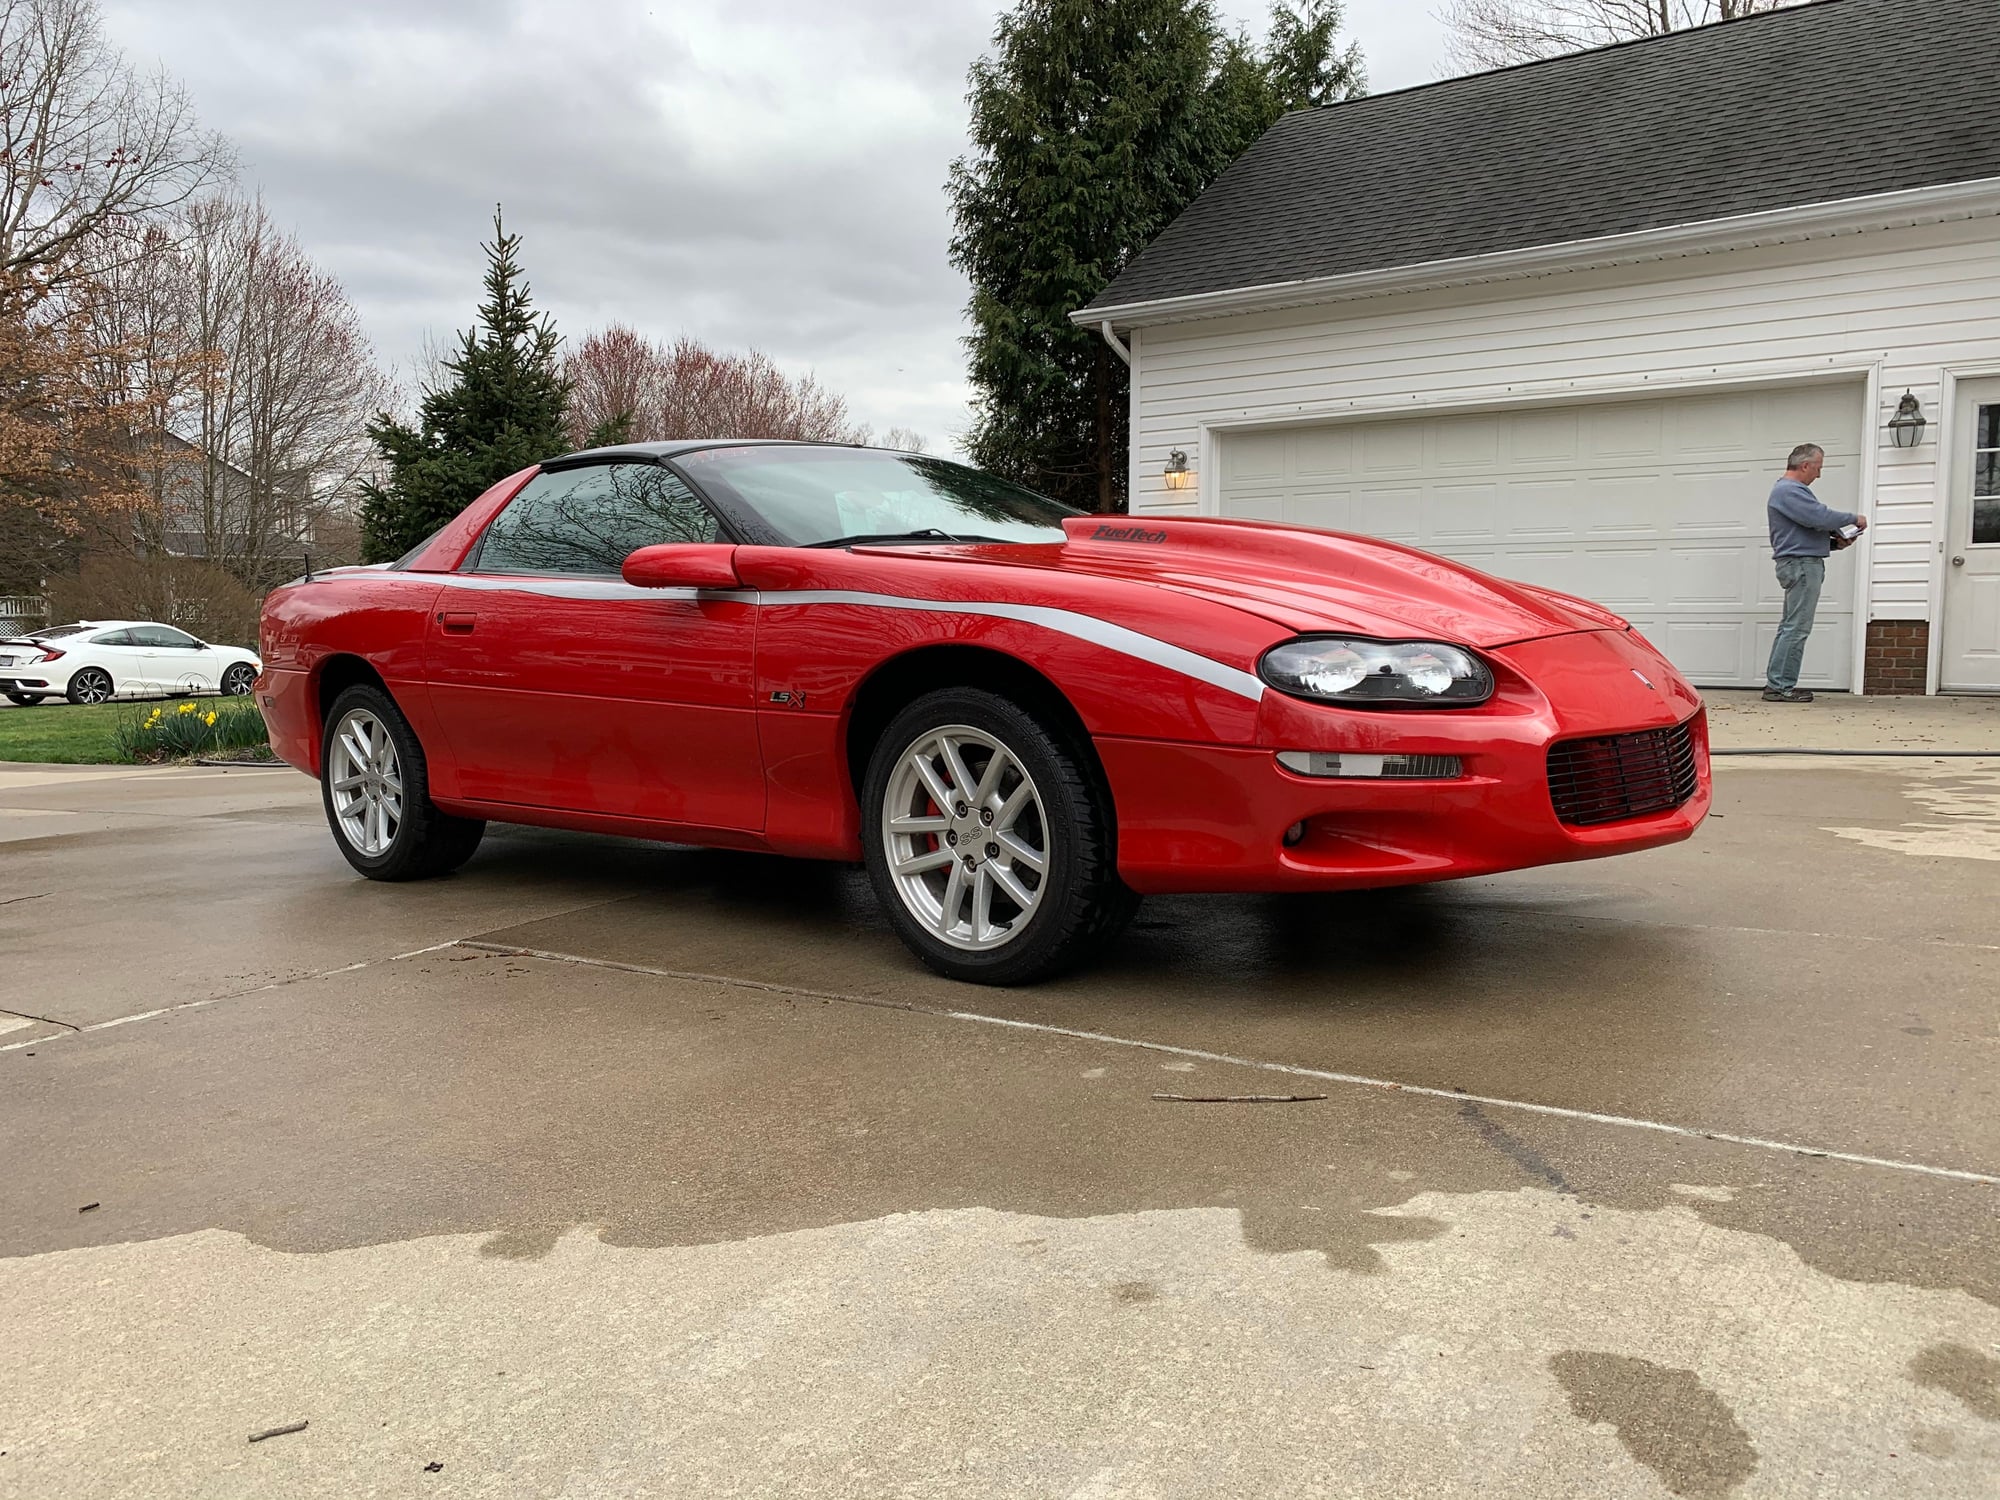 2002 Chevrolet Camaro - 2002 Z/28 6.0 swap - Used - VIN Zijegeiabebdow - 89,758 Miles - 8 cyl - 2WD - Automatic - Coupe - Red - Cortland, OH 44410, United States